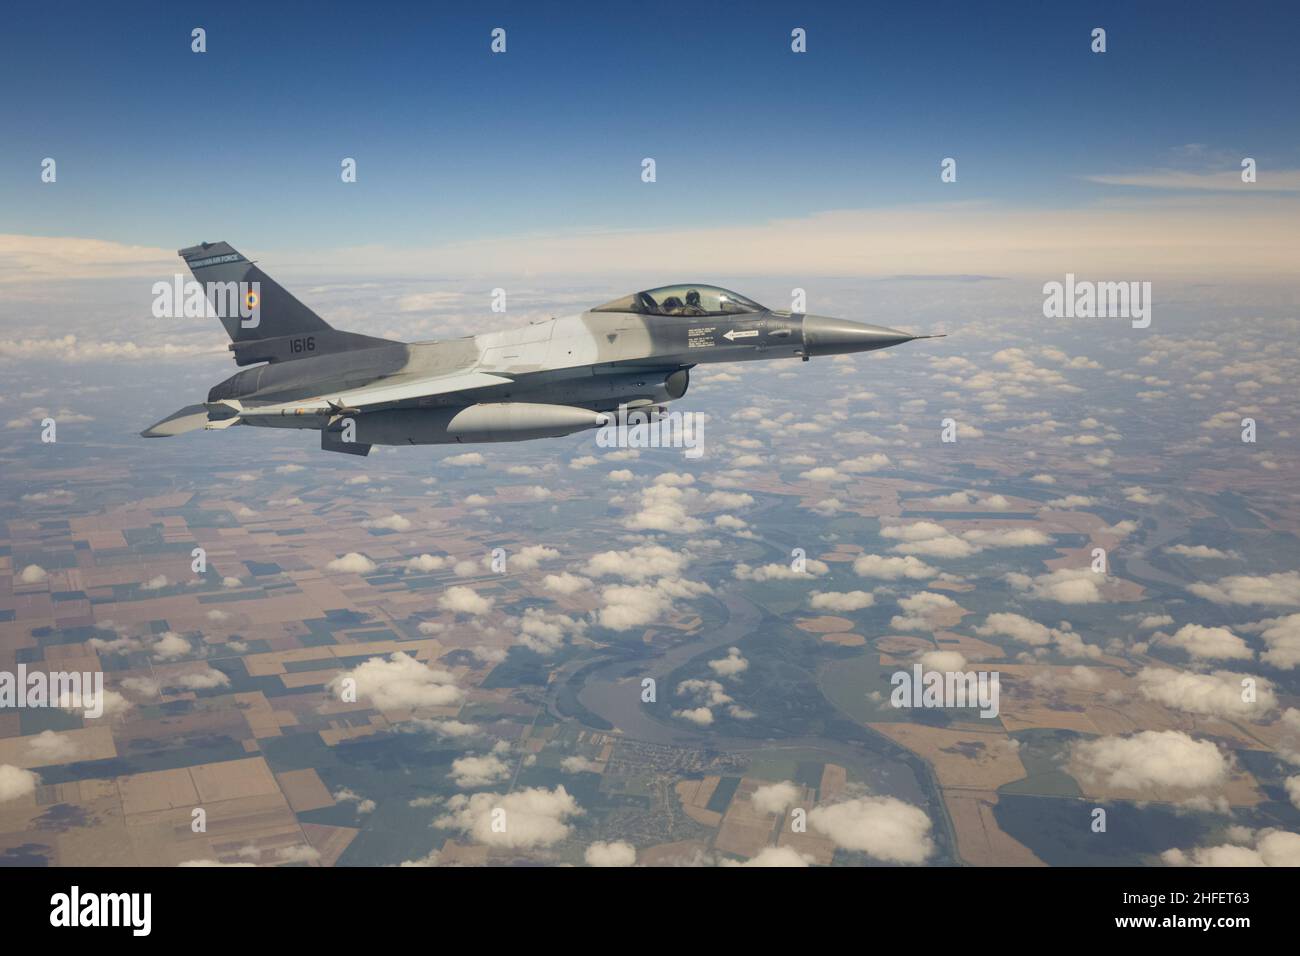 Bucharest, Romania - July 2, 2021: Romanian Air Force F16 Fighting Falcon multirole fighter aircraft at an air policing exercise. Stock Photo